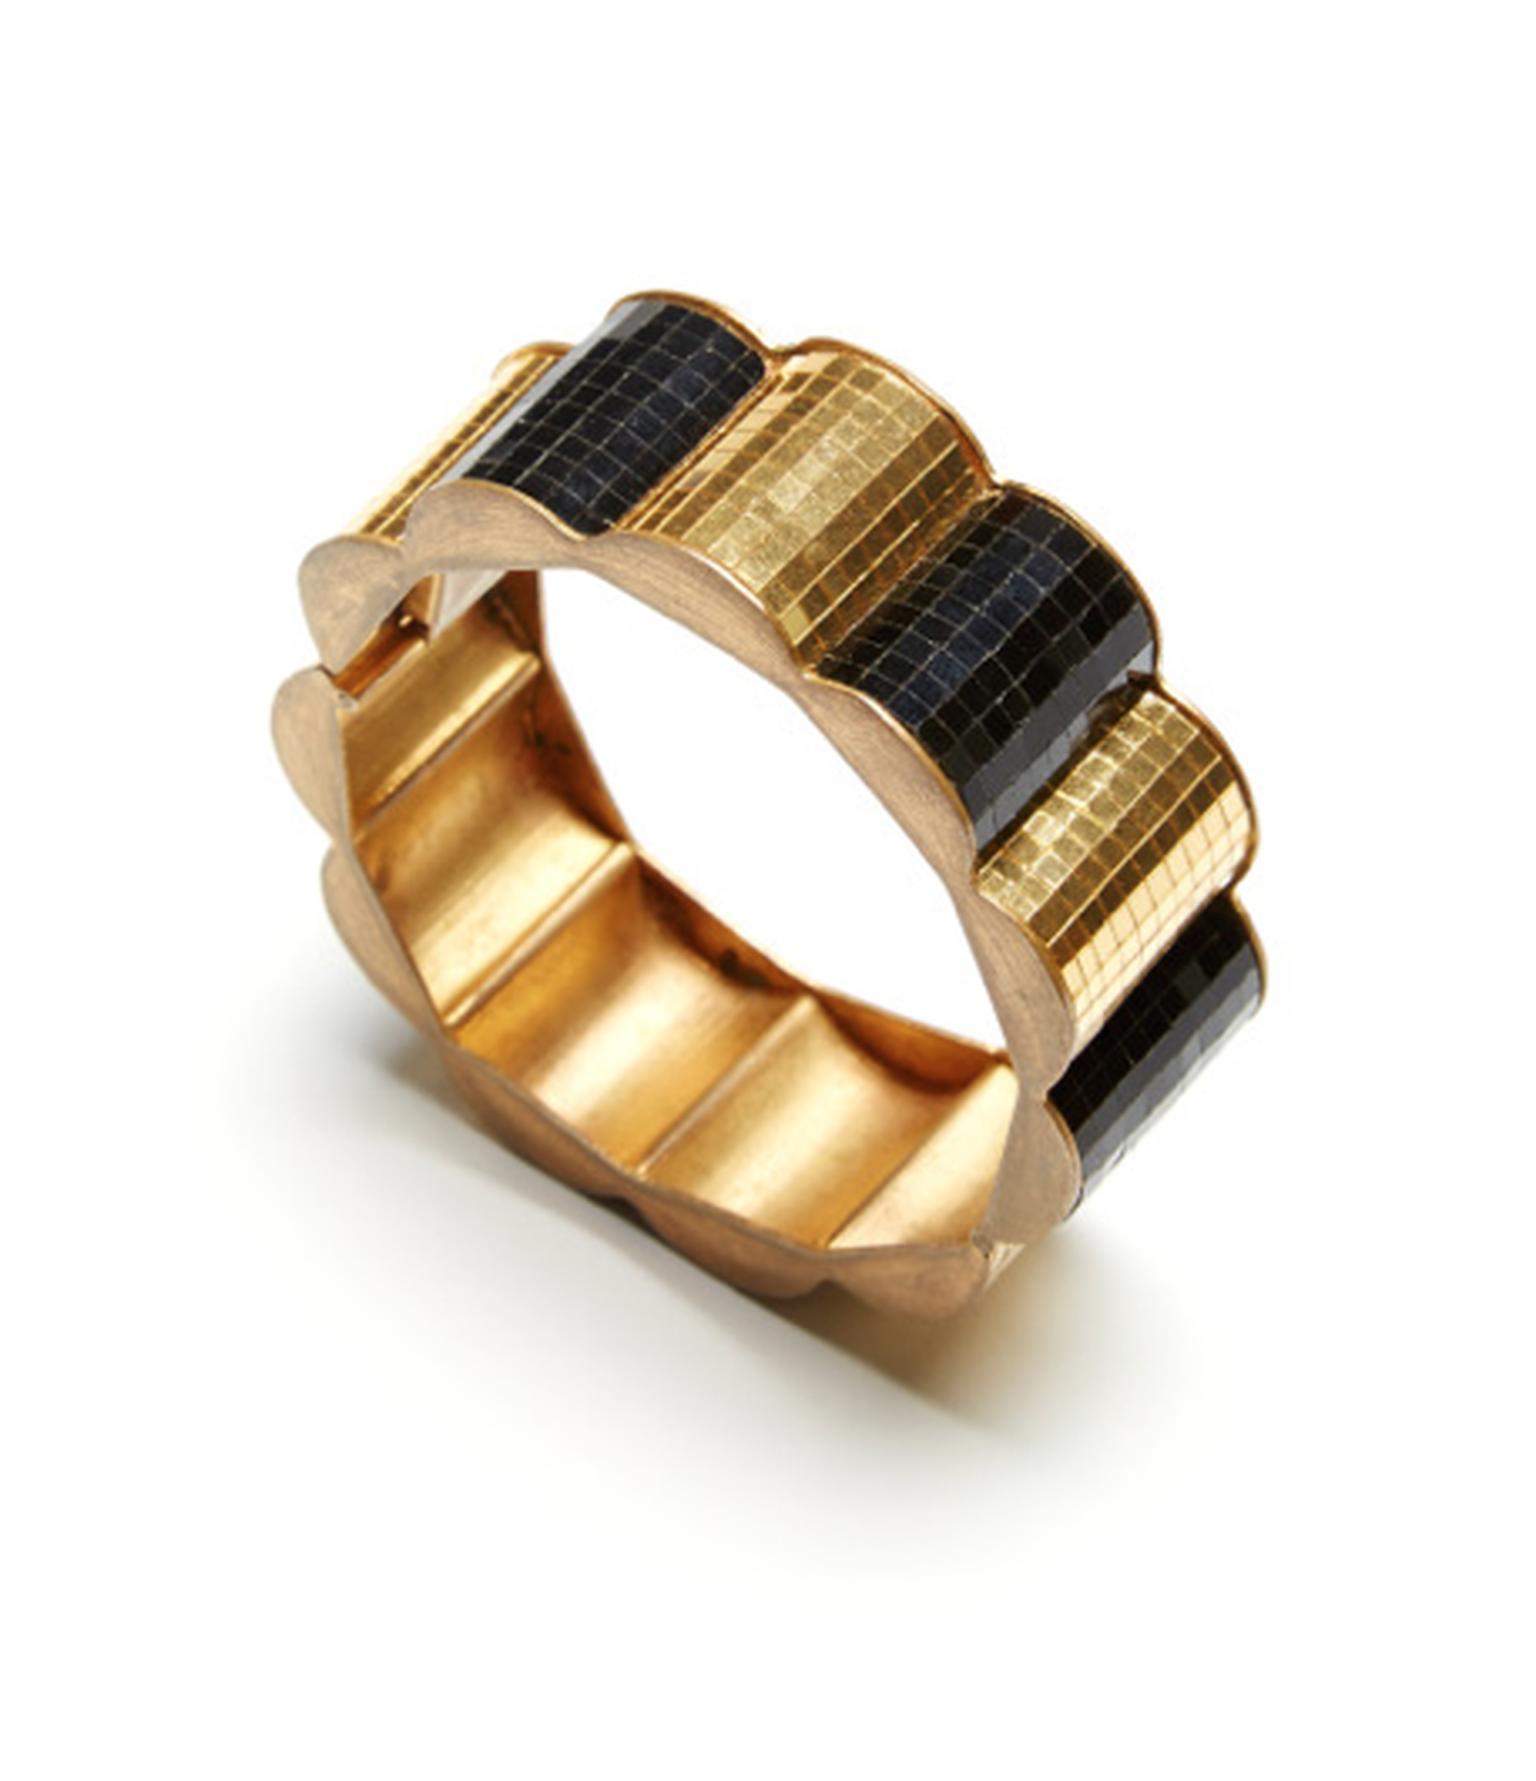 FD Gallery in Manhattan joins Moda Operandi for an exclusive sale of vintage and estate jewelry